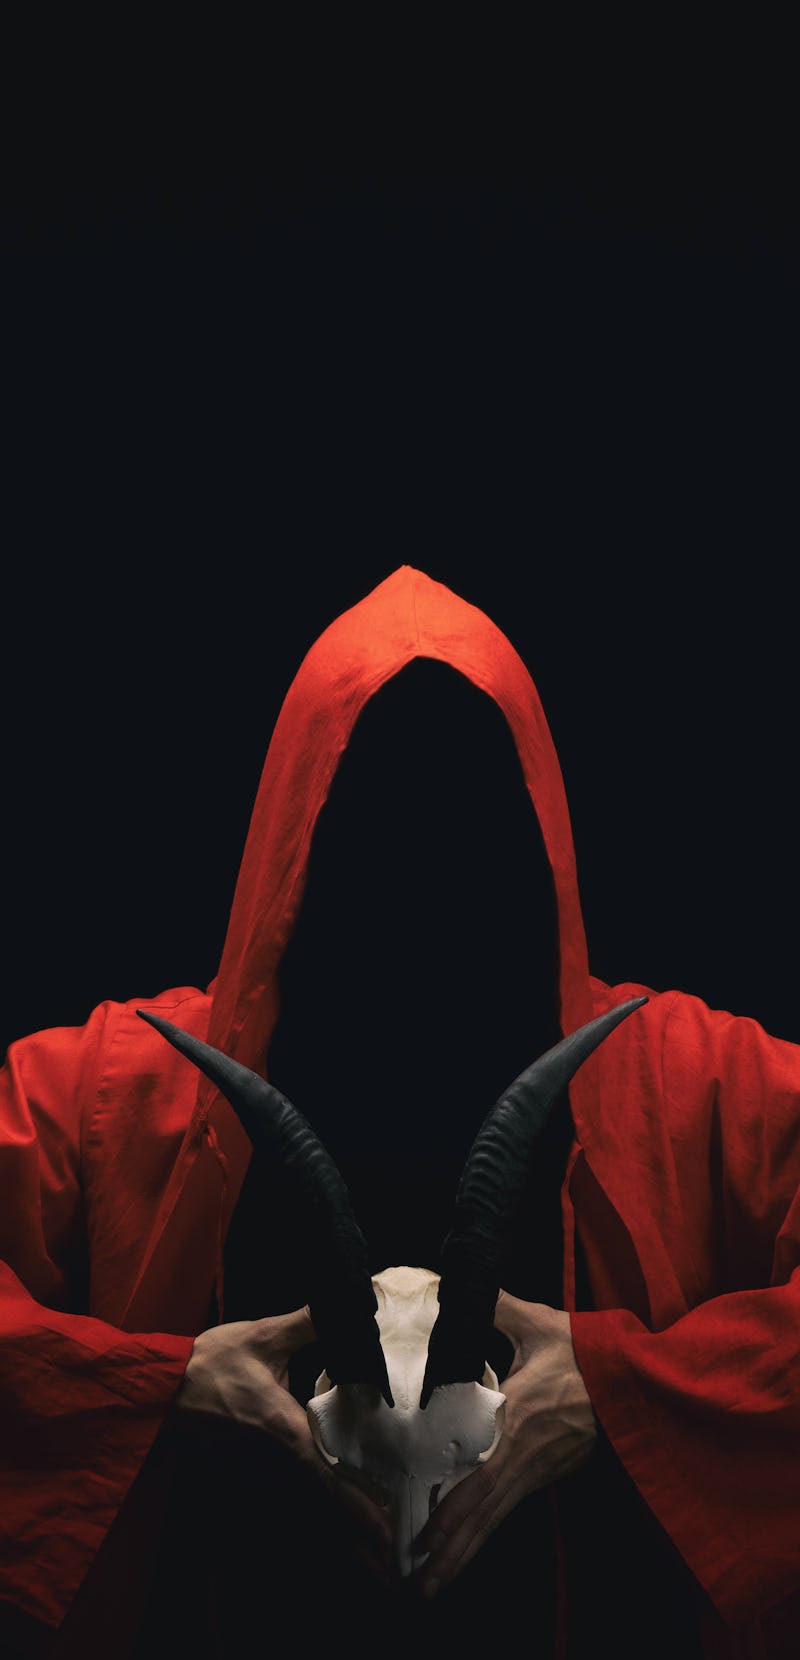 Mystery people in a red hooded cloaks in the dark. Hiding face in shadow. Pointing up with fingers. ...